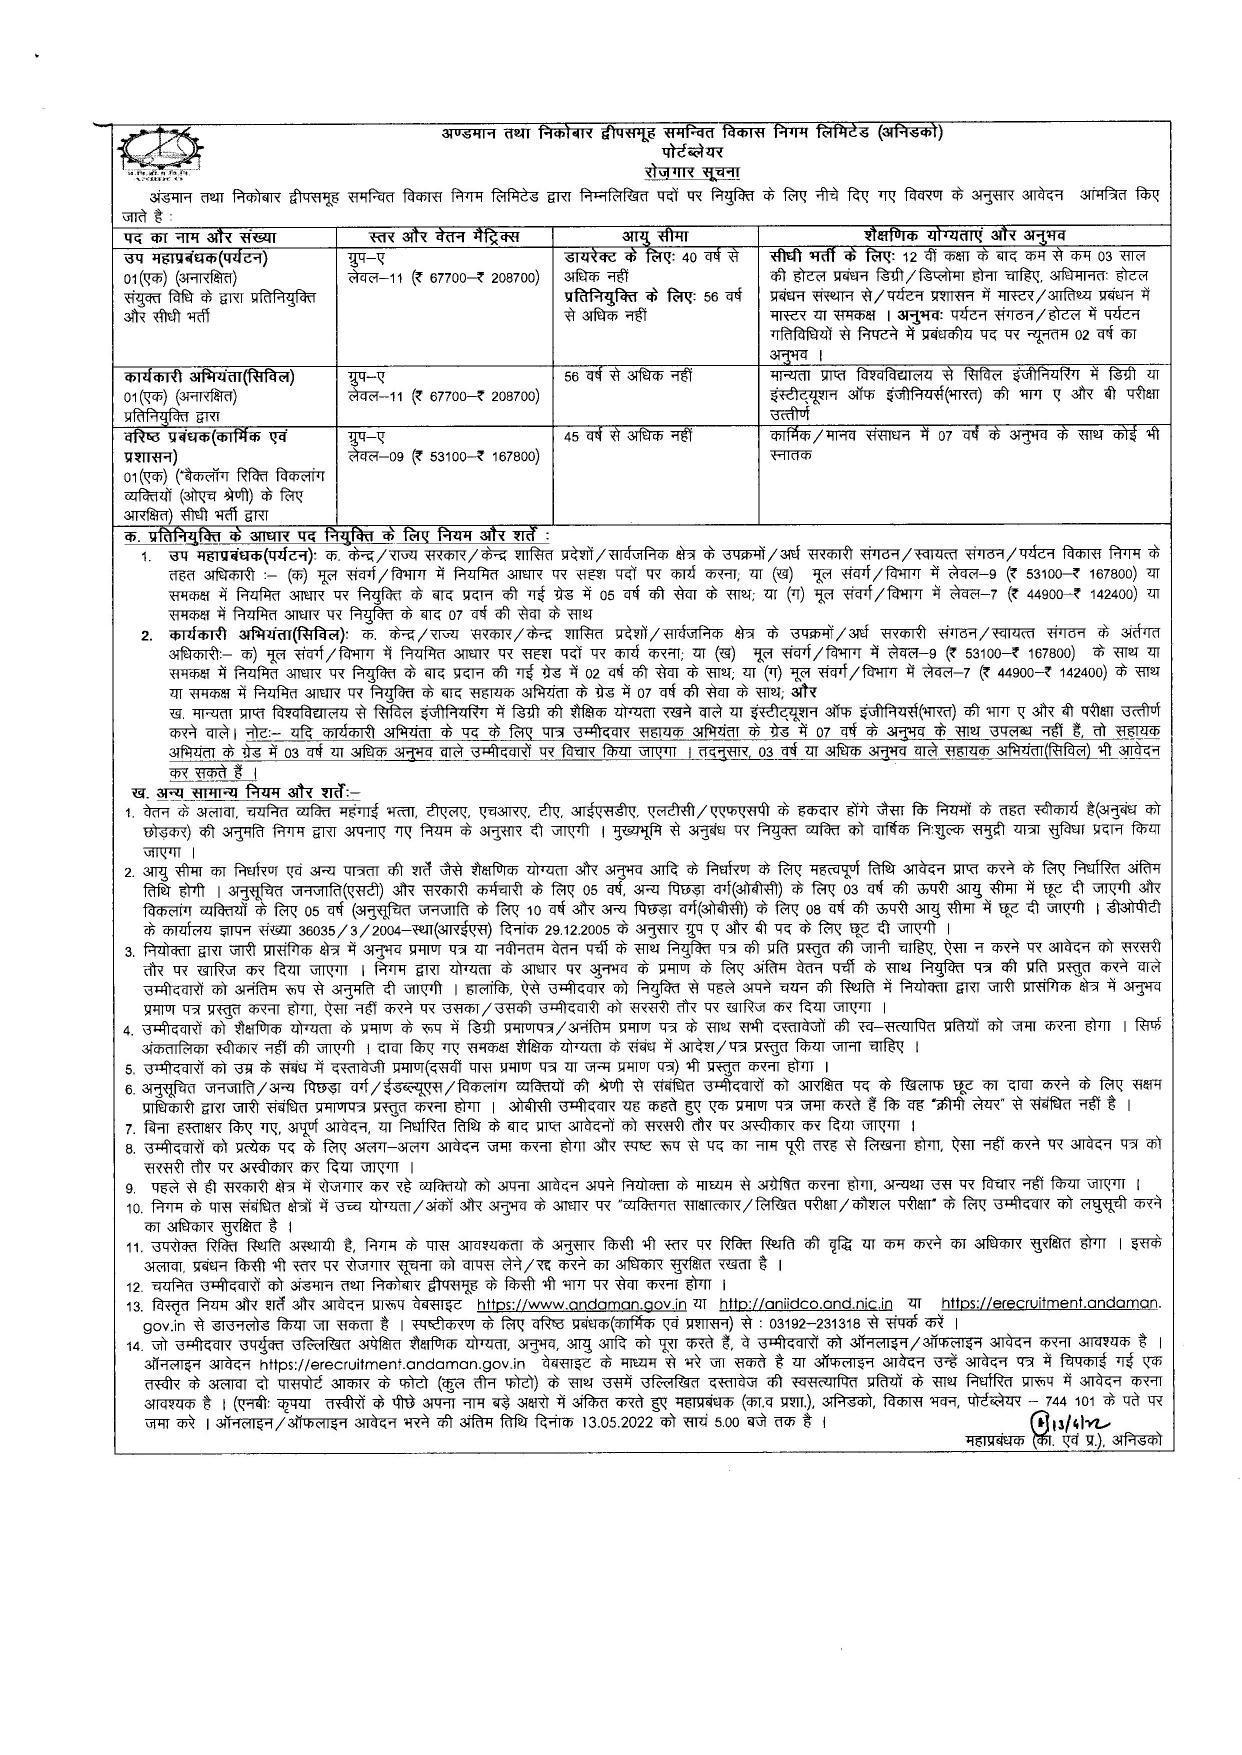 ANIIDCO Invites Application for Senior Manager, Executive Engineer and Deputy General Manager Recruitment 2022 - Page 2